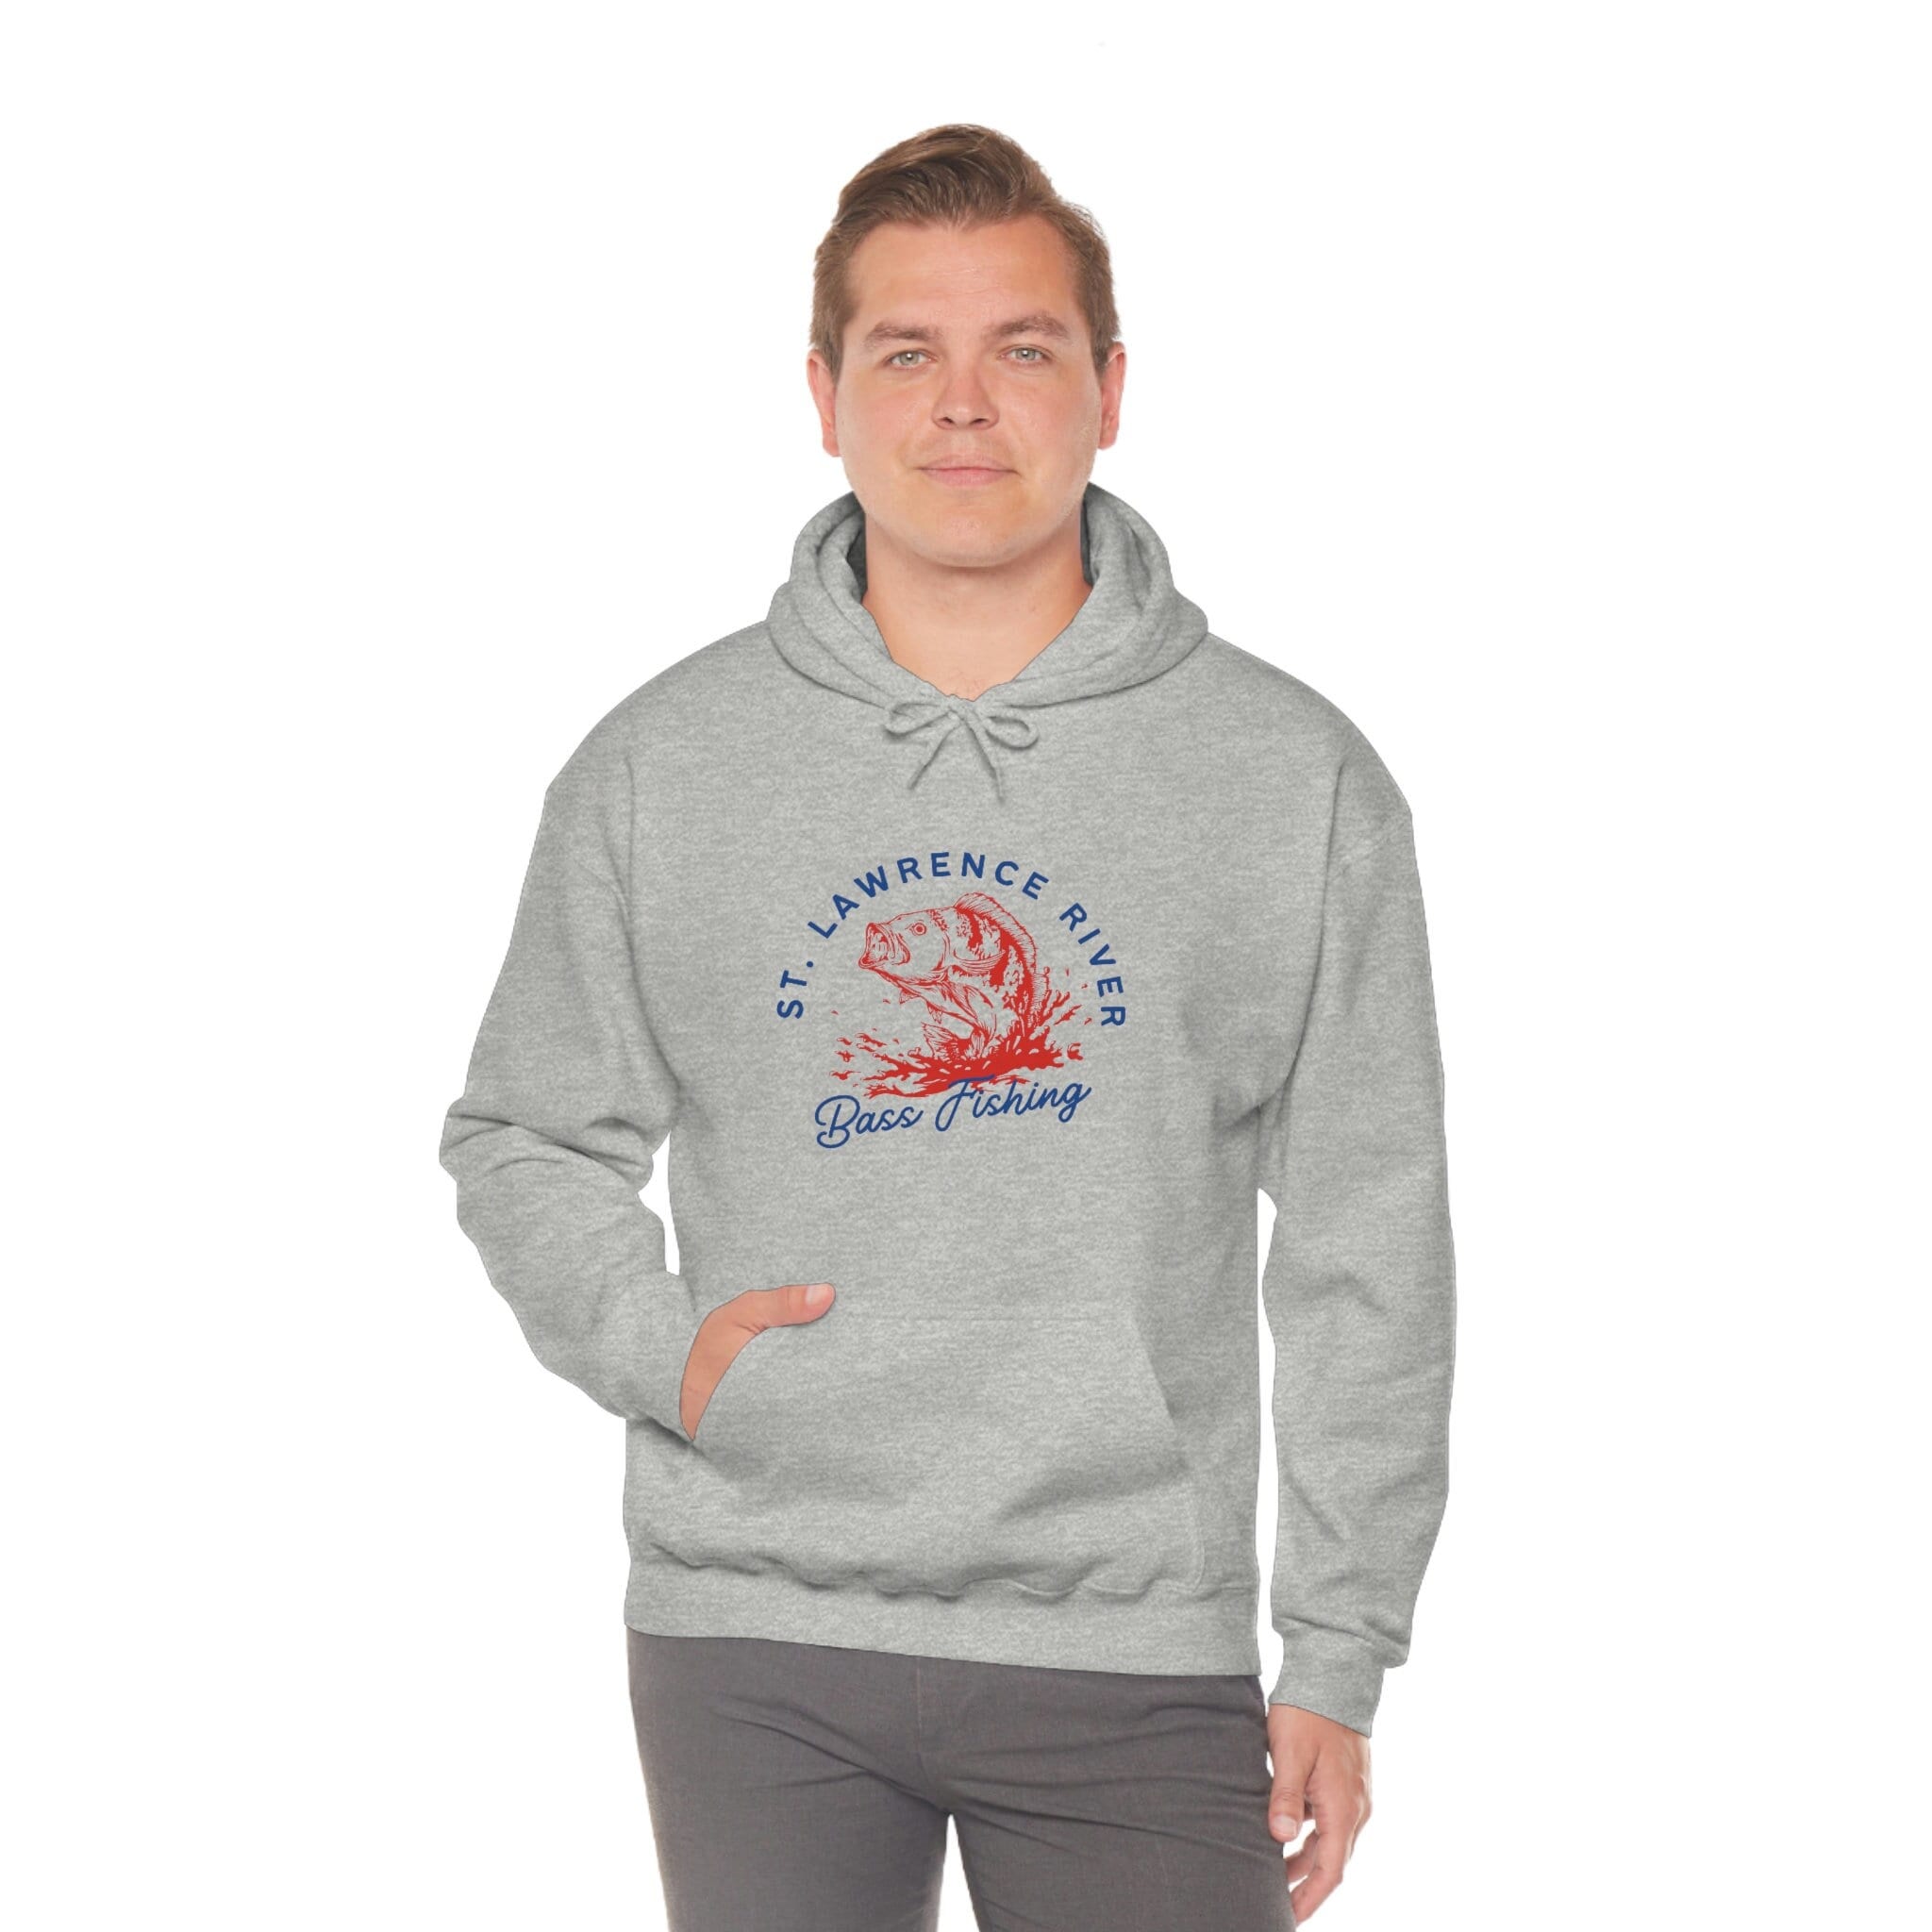 Buy Hooded Fishing Shirt Online In India -  India